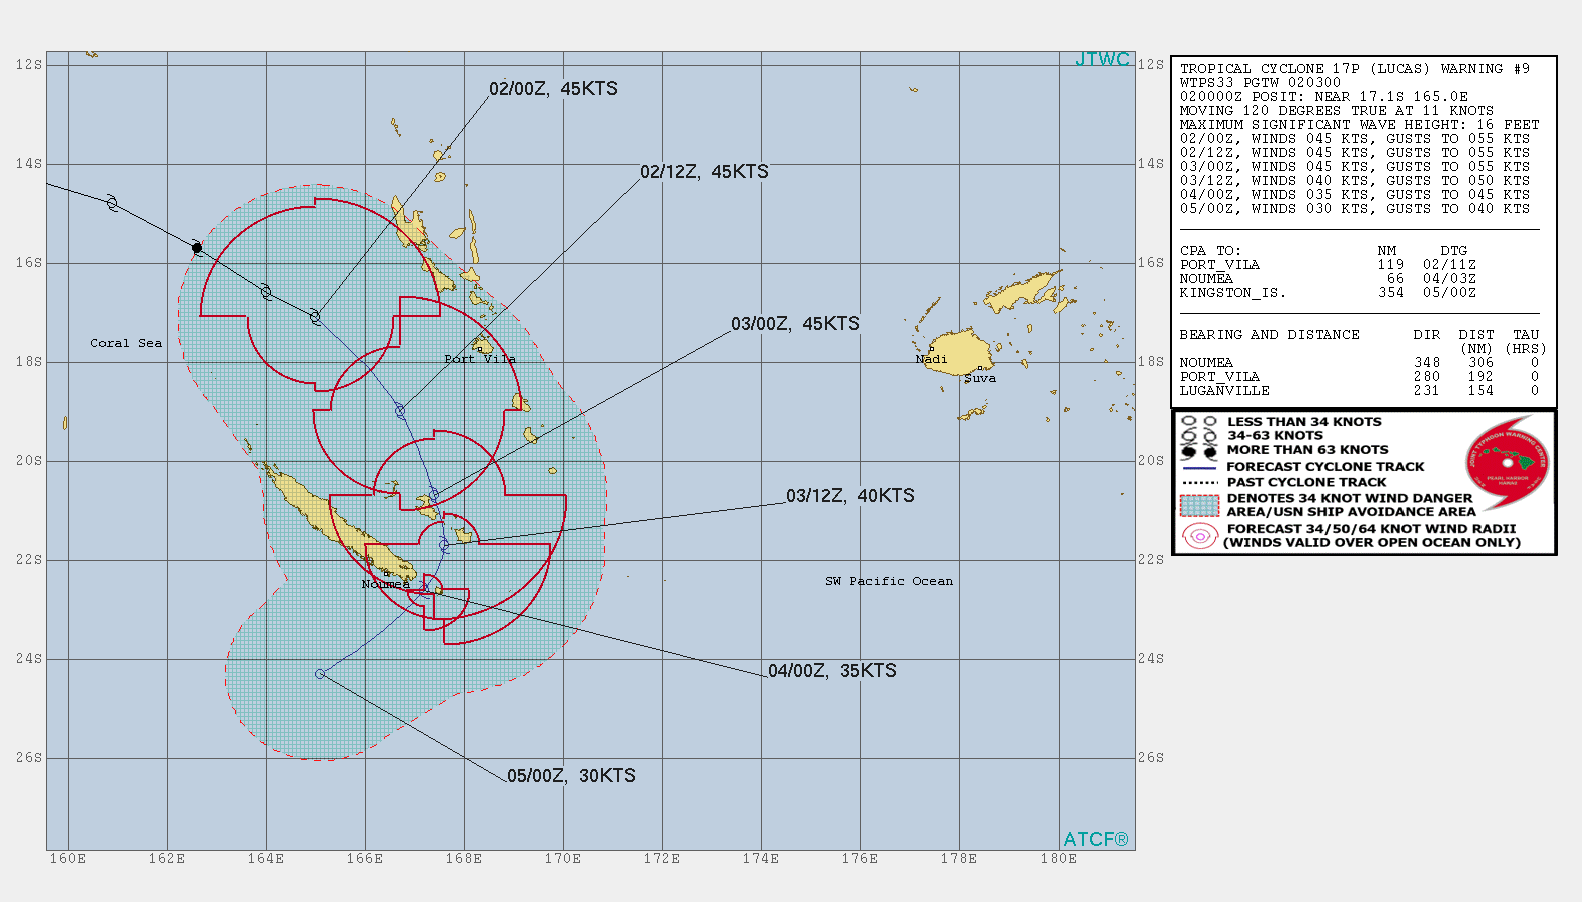 17P(LUCAS). WARNING 9. THE INITIAL POSITION IS PLACED  WITH HIGH CONFIDENCE BASED ON THE EXPOSED LLC IN THE EIR LOOP. THE  INITIAL INTENSITY OF 45KTS IS EXTRAPOLATED FROM 012038UTC ASCAT PARTIAL  PASS NEAR THE CENTER AND SUPPORTED BY A 020040Z ADT ESTIMATE OF 47KTS.  UPPER-LEVEL ANALYSIS INDICATES STRONG (35KNOTS+) VERTICAL WIND SHEAR  PARTLY OFFSET BY ROBUST POLEWARD OUTFLOW. TC 17P IS FORECAST TO  TRACK SOUTHEASTWARD ALONG THE SOUTHWESTERN PERIPHERY OF A NEAR- EQUATORIAL RIDGE THROUGH 24H. AFTERWARD. THE SUBTROPICAL RIDGE TO  THE SOUTHEAST WILL ASSUME STEERING AND DRIVE THE SYSTEM SOUTHWARD THEN  SOUTHWESTWARD, PASSING JUST OFF THE SOUTHERN TIP OF NEW CALEDONIA  AROUND 48H. TC LUCAS IS EXPECTED TO GRADUALLY WEAKEN AS THE WIND SHEAR  FURTHER INCREASES AND SST VALUES COOL TO 25C, LEADING TO INTENSITY FALLING DOWN BELOW 35KNOTS BY 72H, POSSIBLY SOONER.